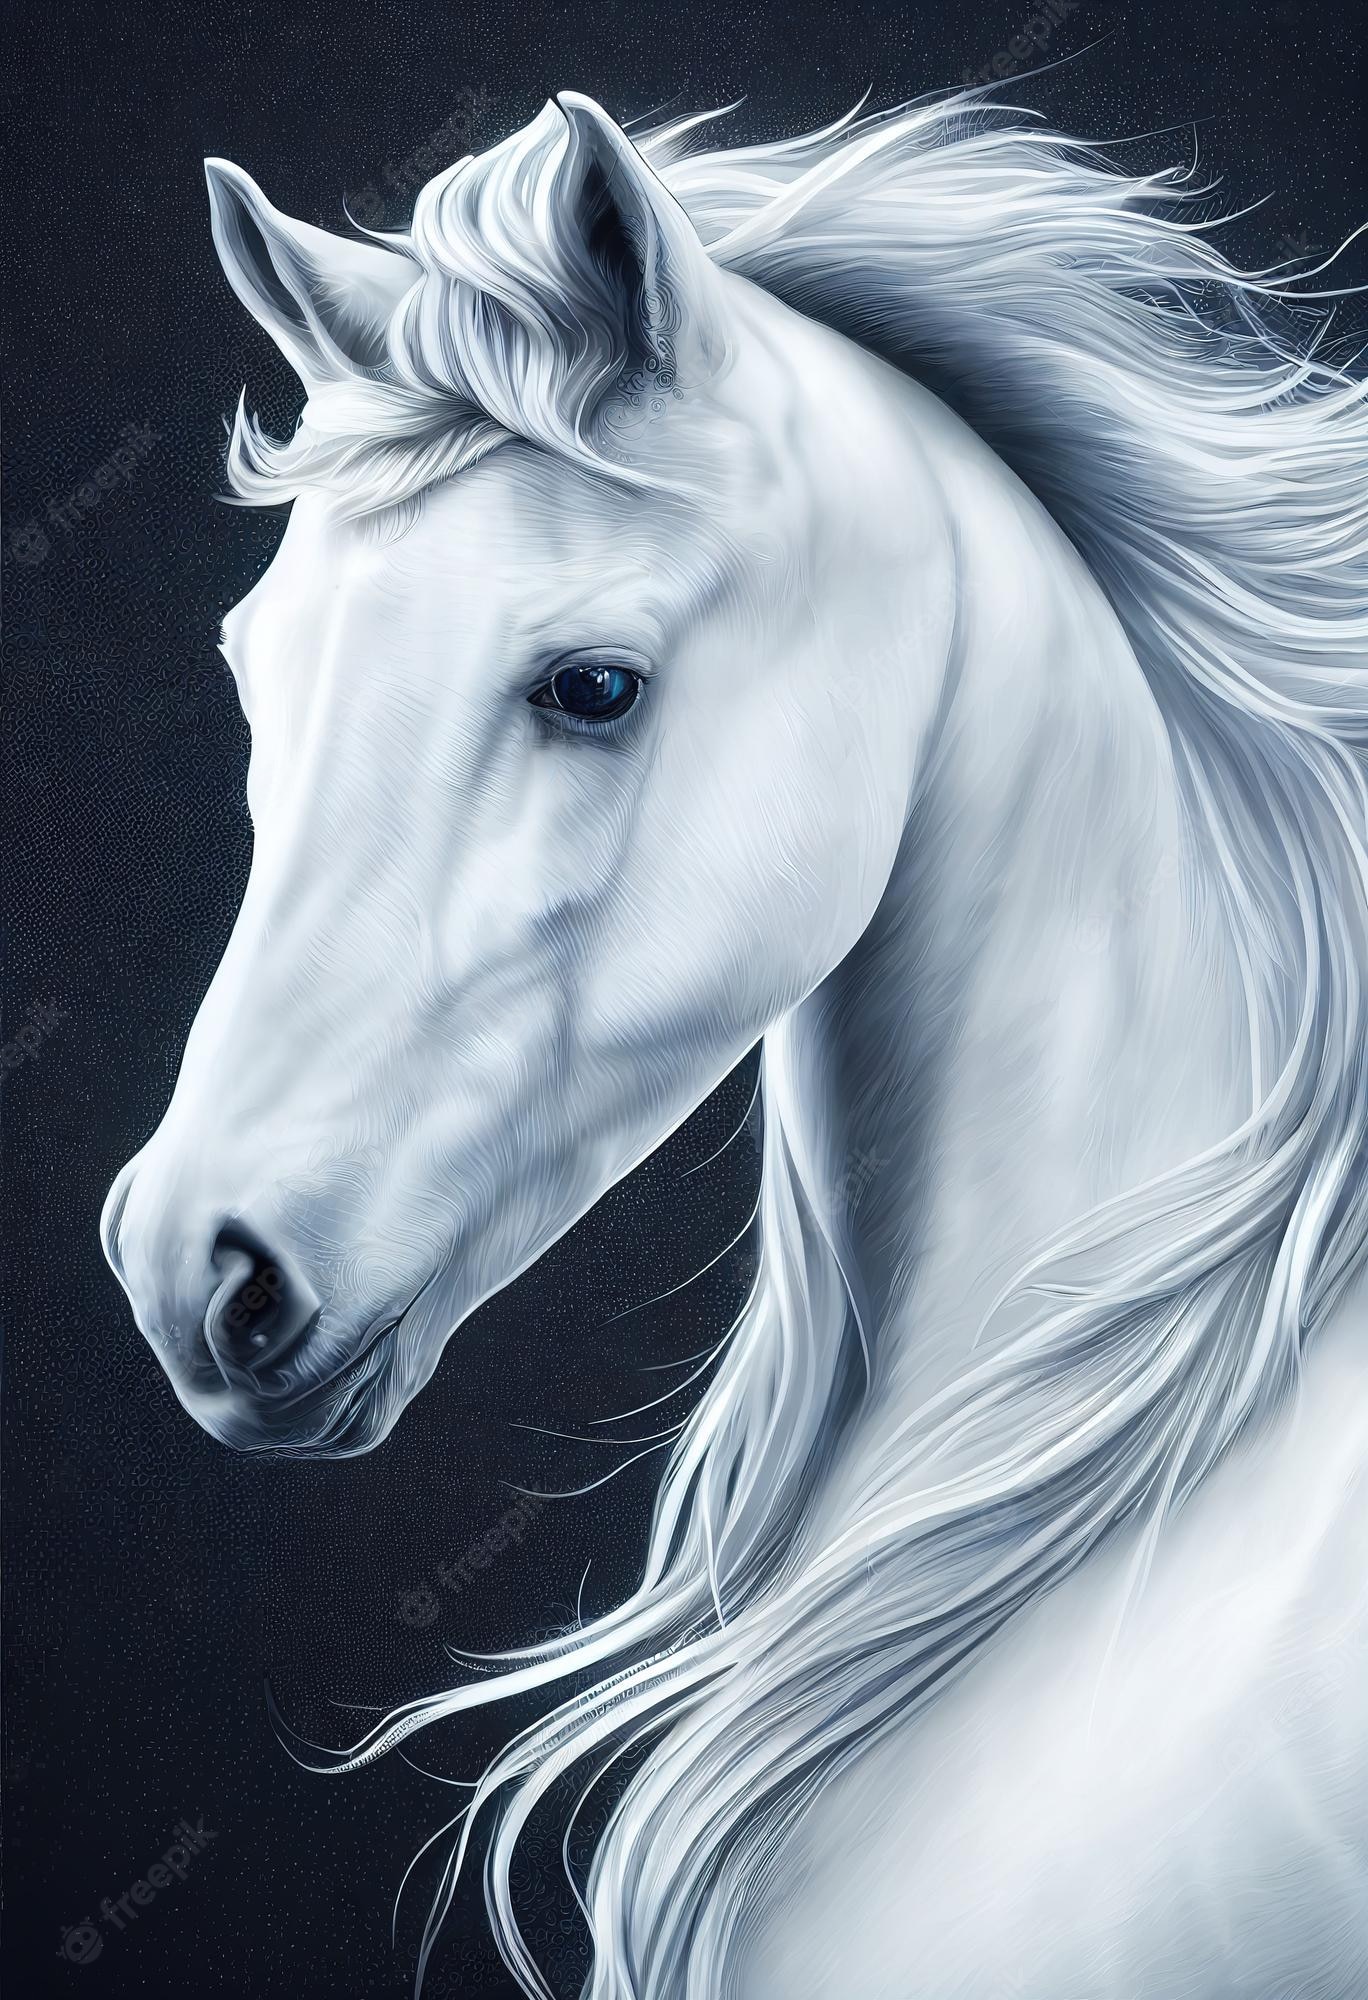 Horse Wallpapers - Top 30 Best Horse Wallpapers [ HQ ]